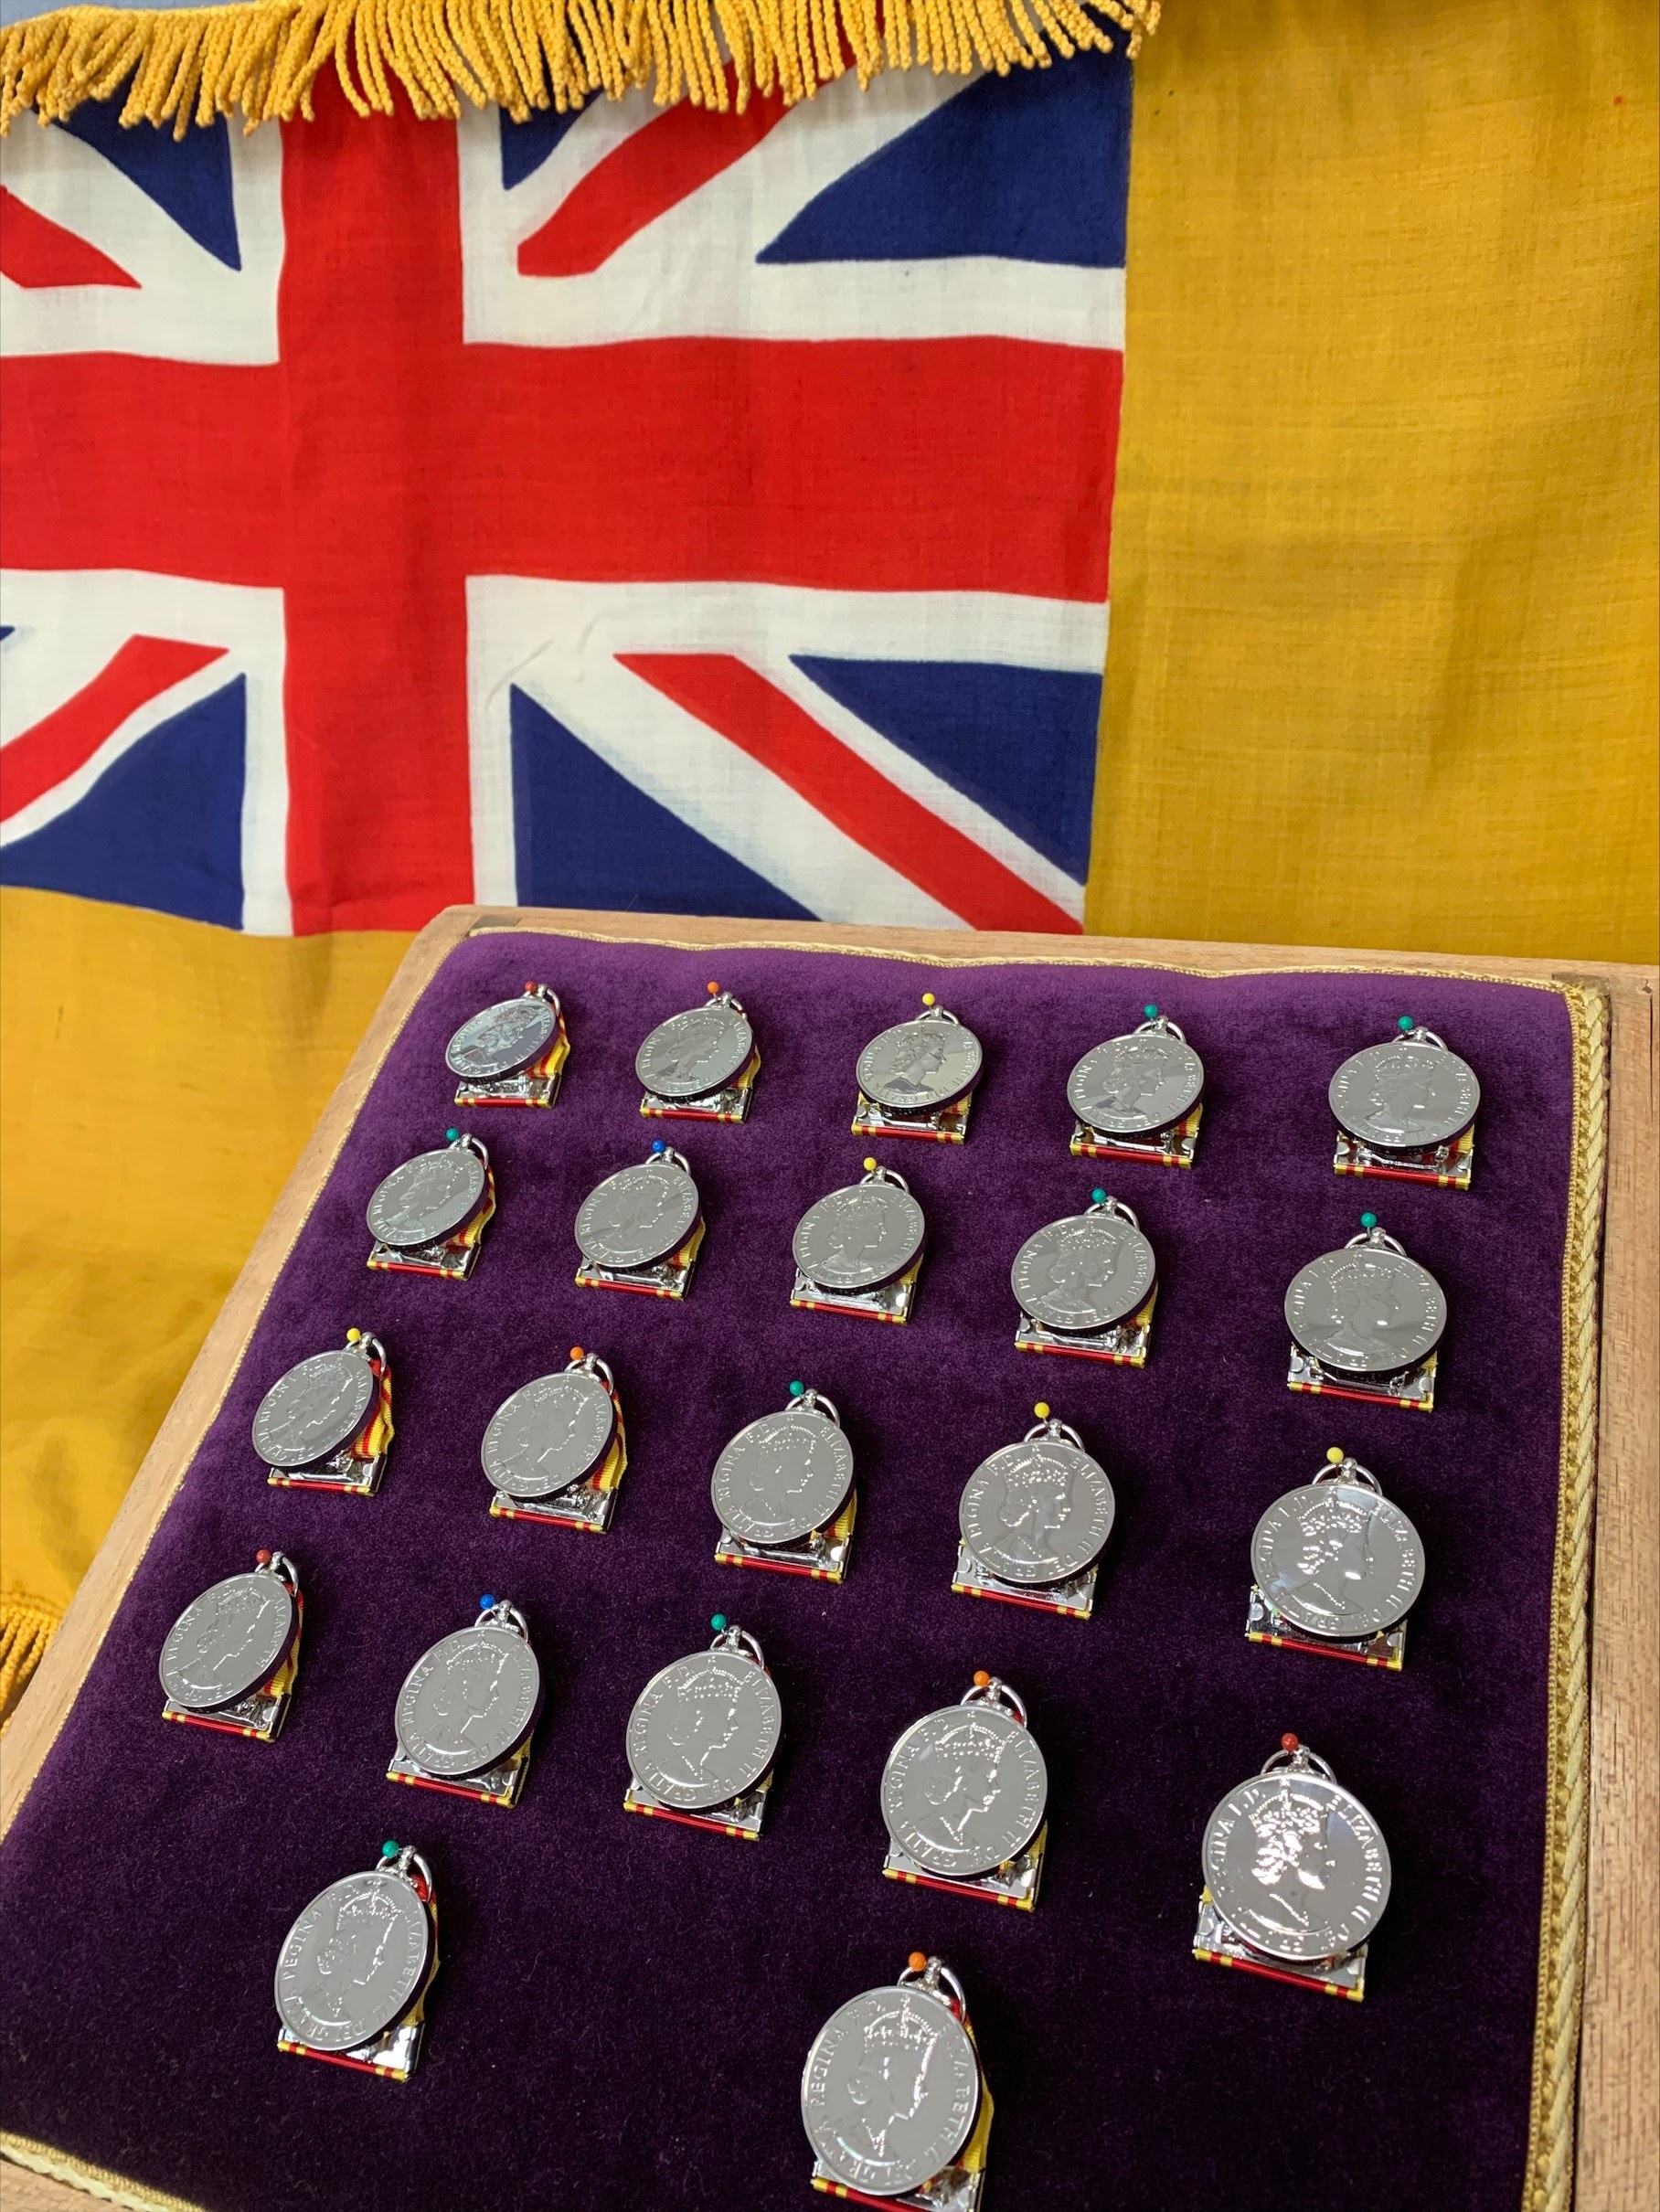 A photo of 20 year medals on a purple cushion and a Union Jack Flag.